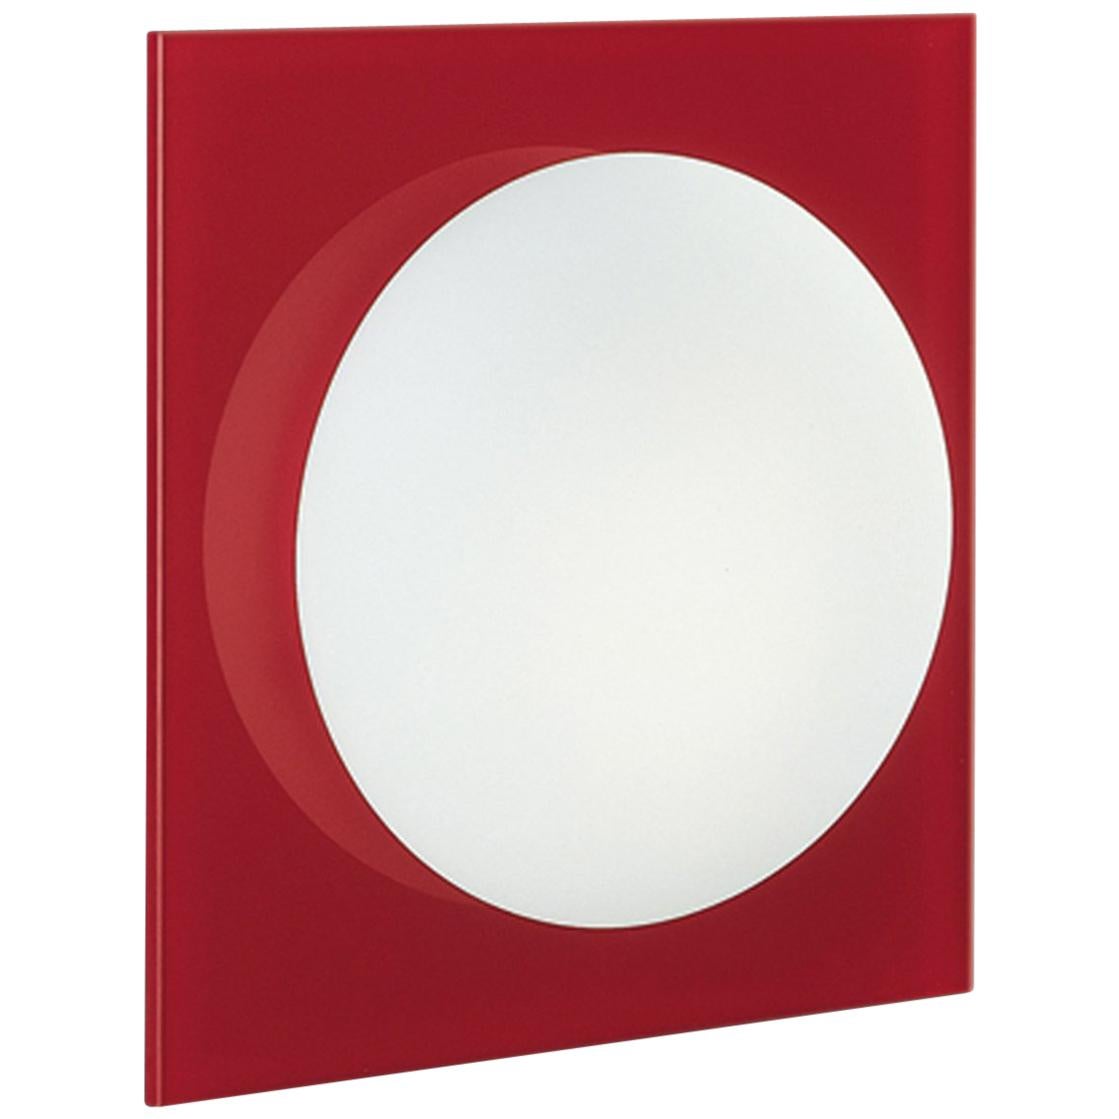 Modern Leucos Gio P-PL 40 Wall Sconce in Satin White and Red by Michele Sbrogiò